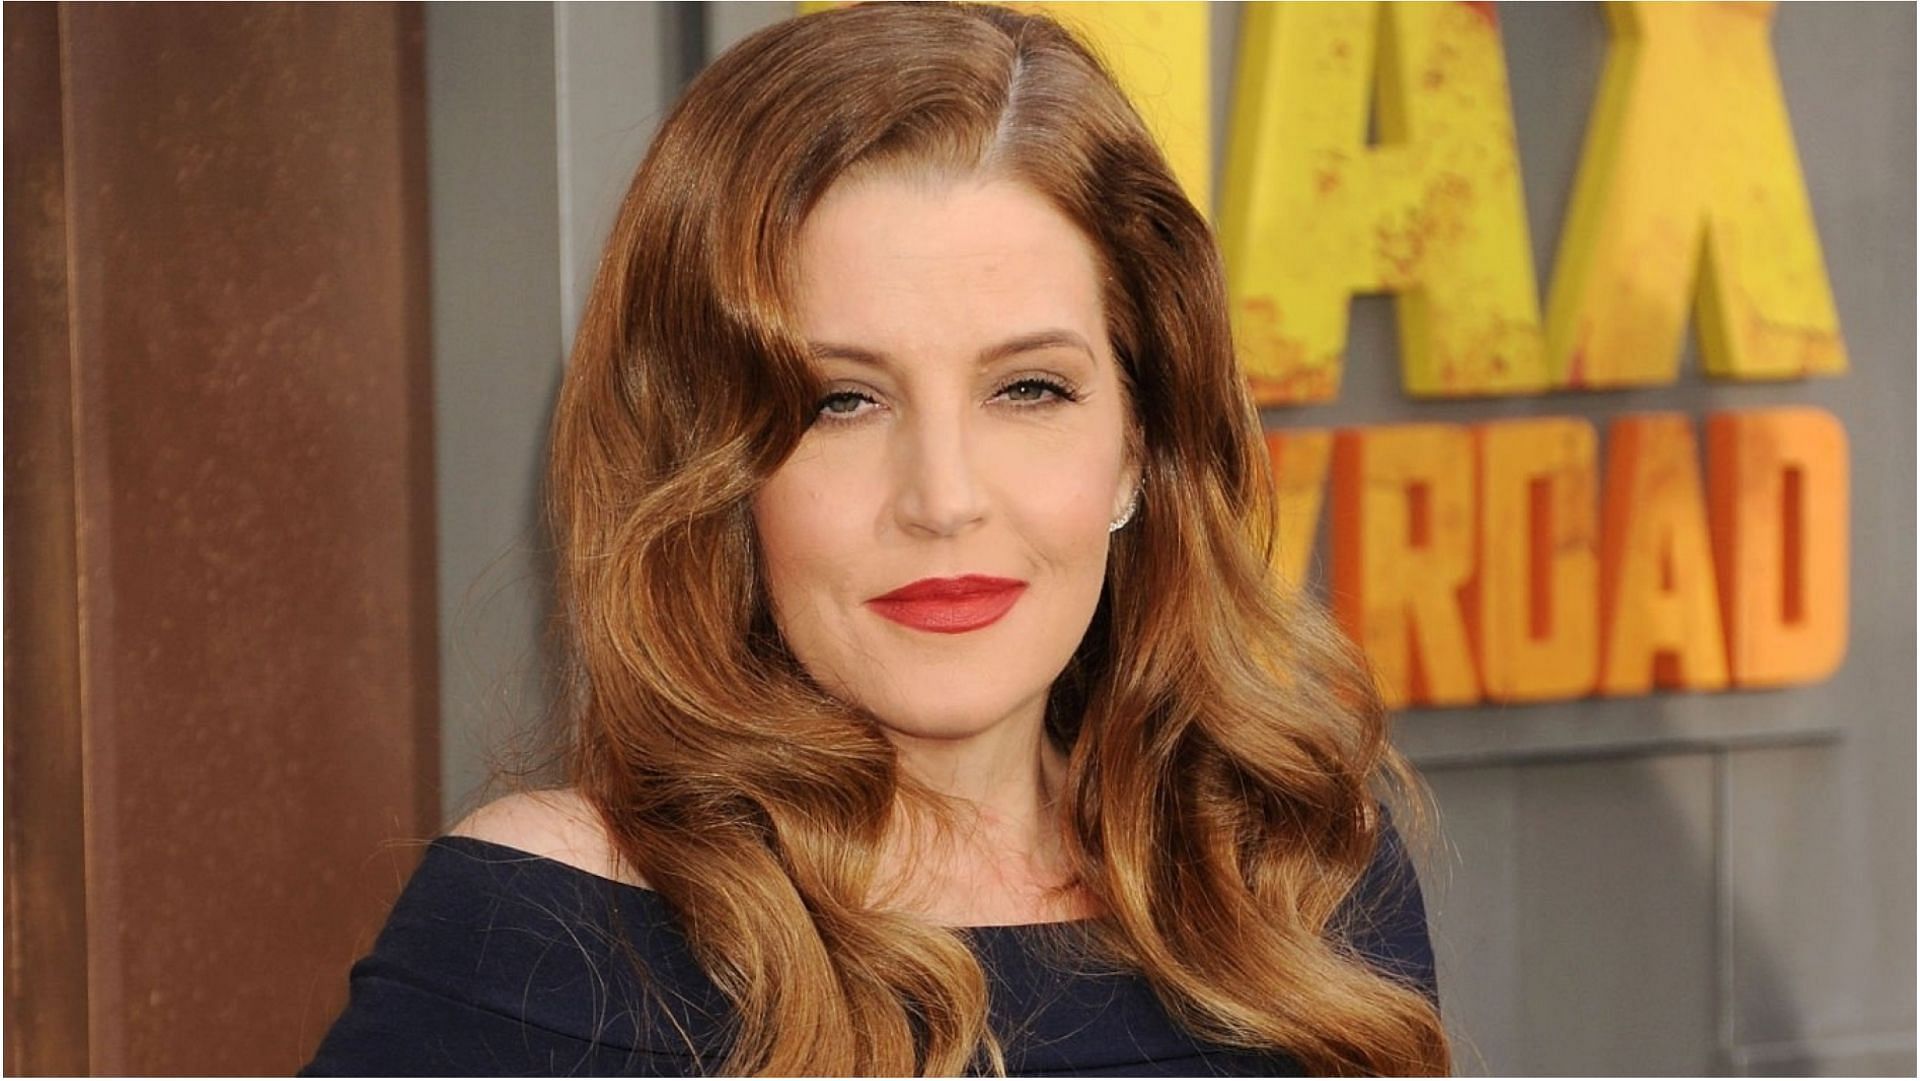 Lisa Marie Presley recently died from cardiac arrest at the age of 54 (Image via Jeffrey Mayer/Getty Images)